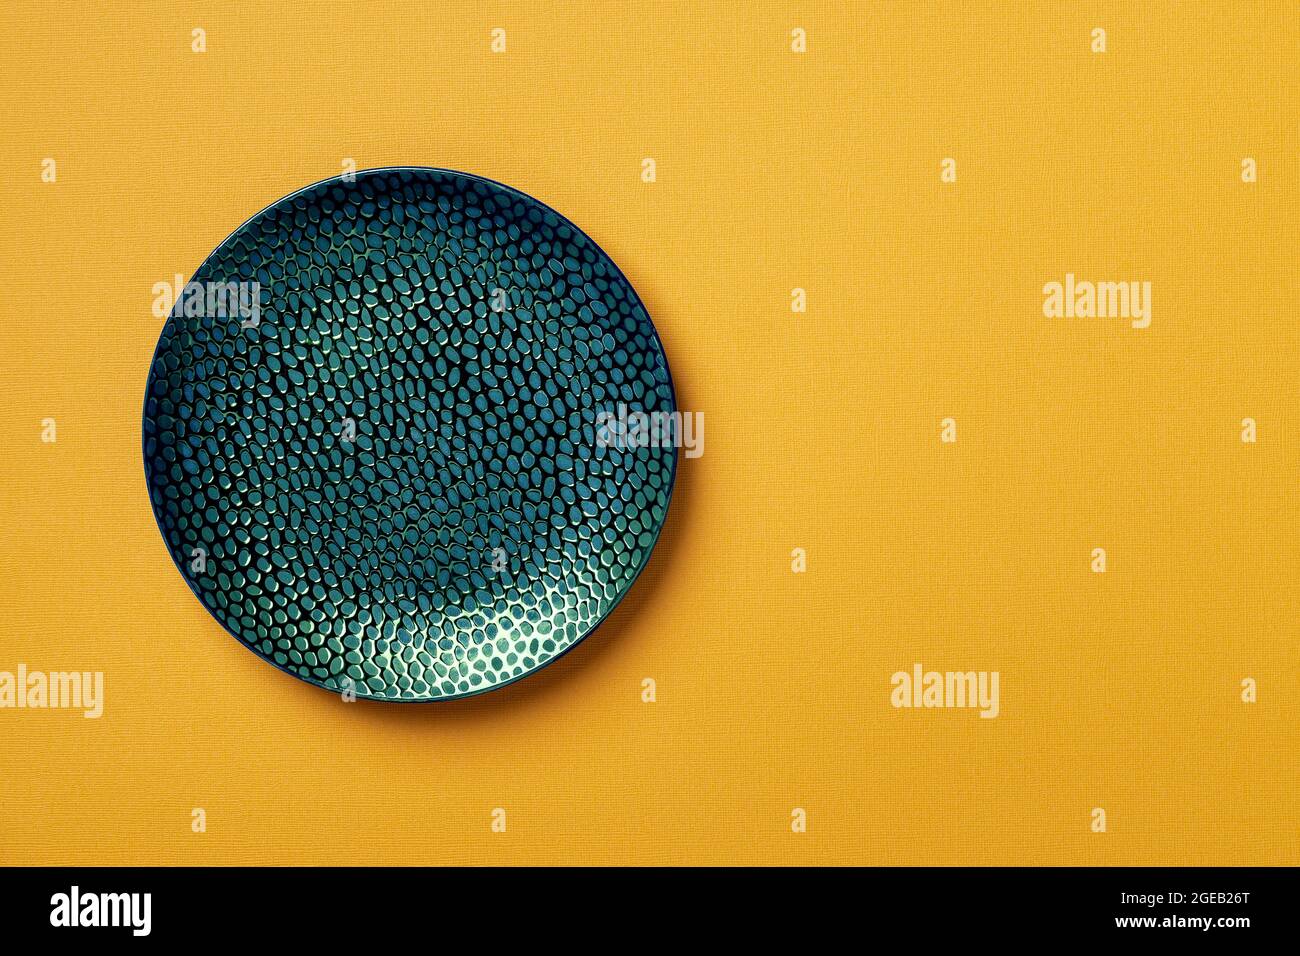 Textured turquoise teal round plate on a textured yellow background. Modern ceramic crockery and tableware for stylish food design. Empty dishes. Stock Photo